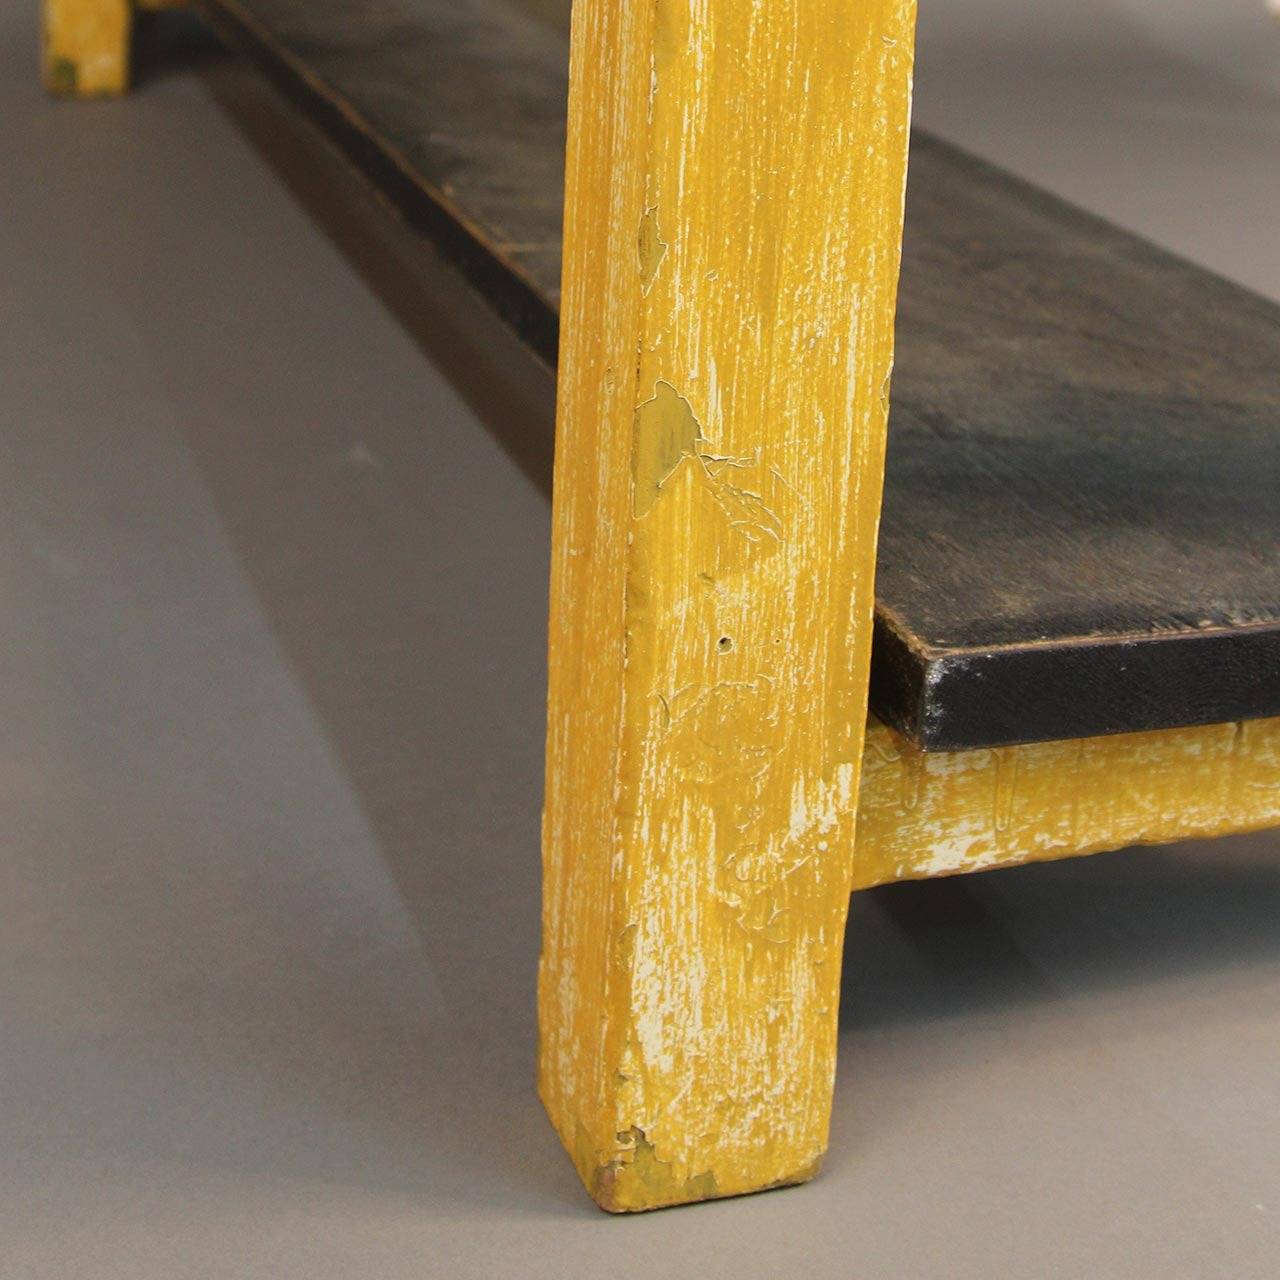 Unique Zinc Top Table with yellow legs and removale bottom shelf.
Created by an English Craftsman/artist #039--01